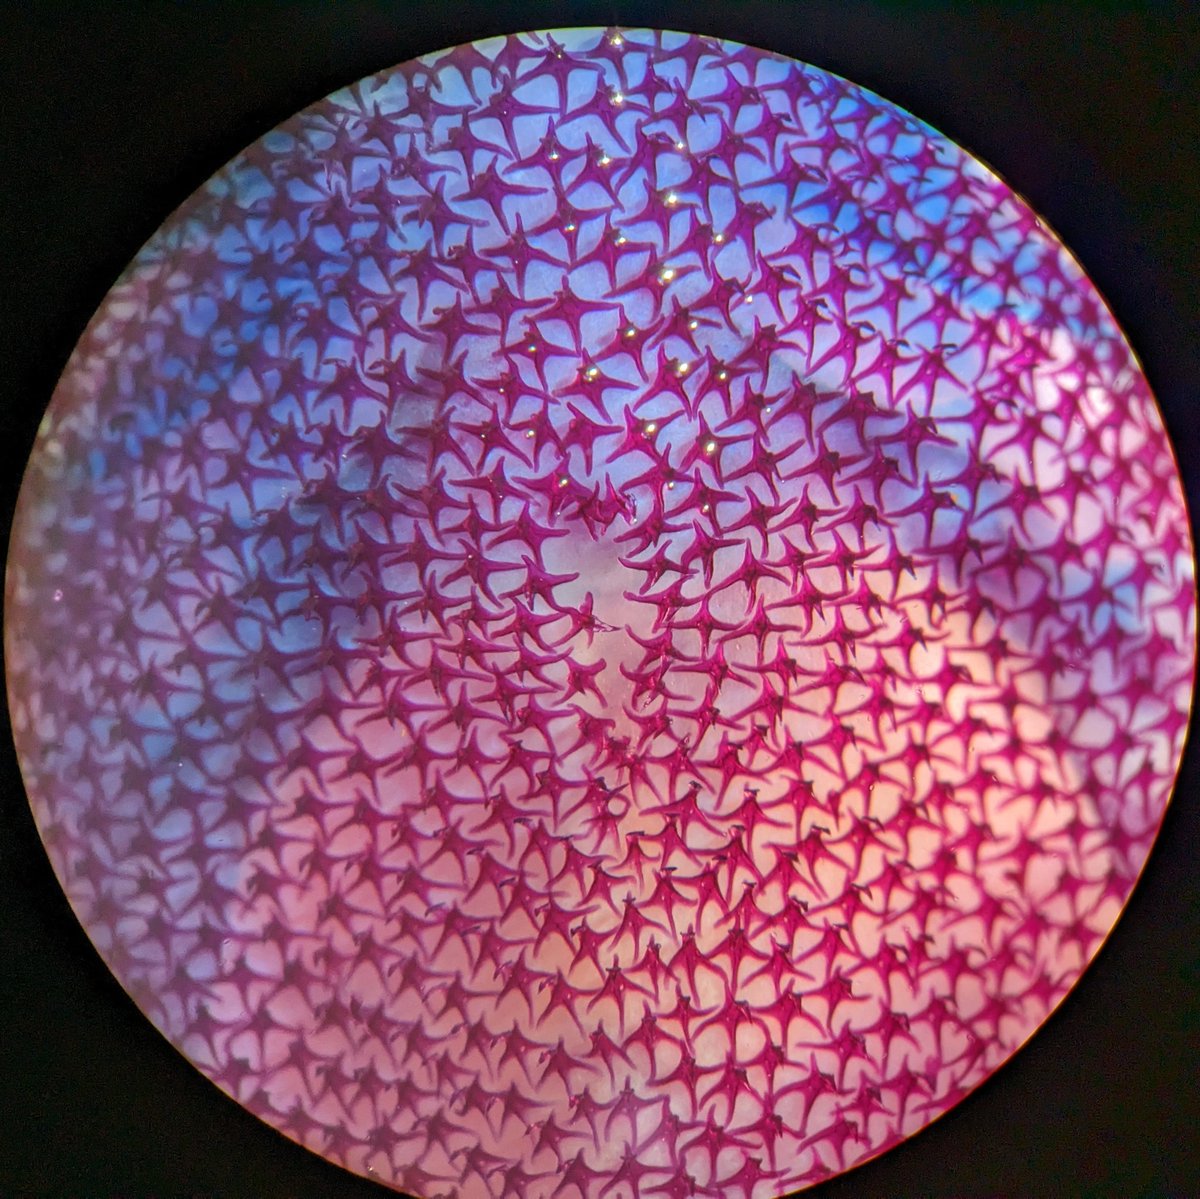 Shark belly-buttons heal! Skin denticles surround the 'scar', then as the skin heals over the denticles grow to crowd the space. Whether sharks are born in eggs (yolk-attached) or live (placental) they all have umbilical scars that heal. 🦈🦷 #babyshark #skinteeth #sharkscience